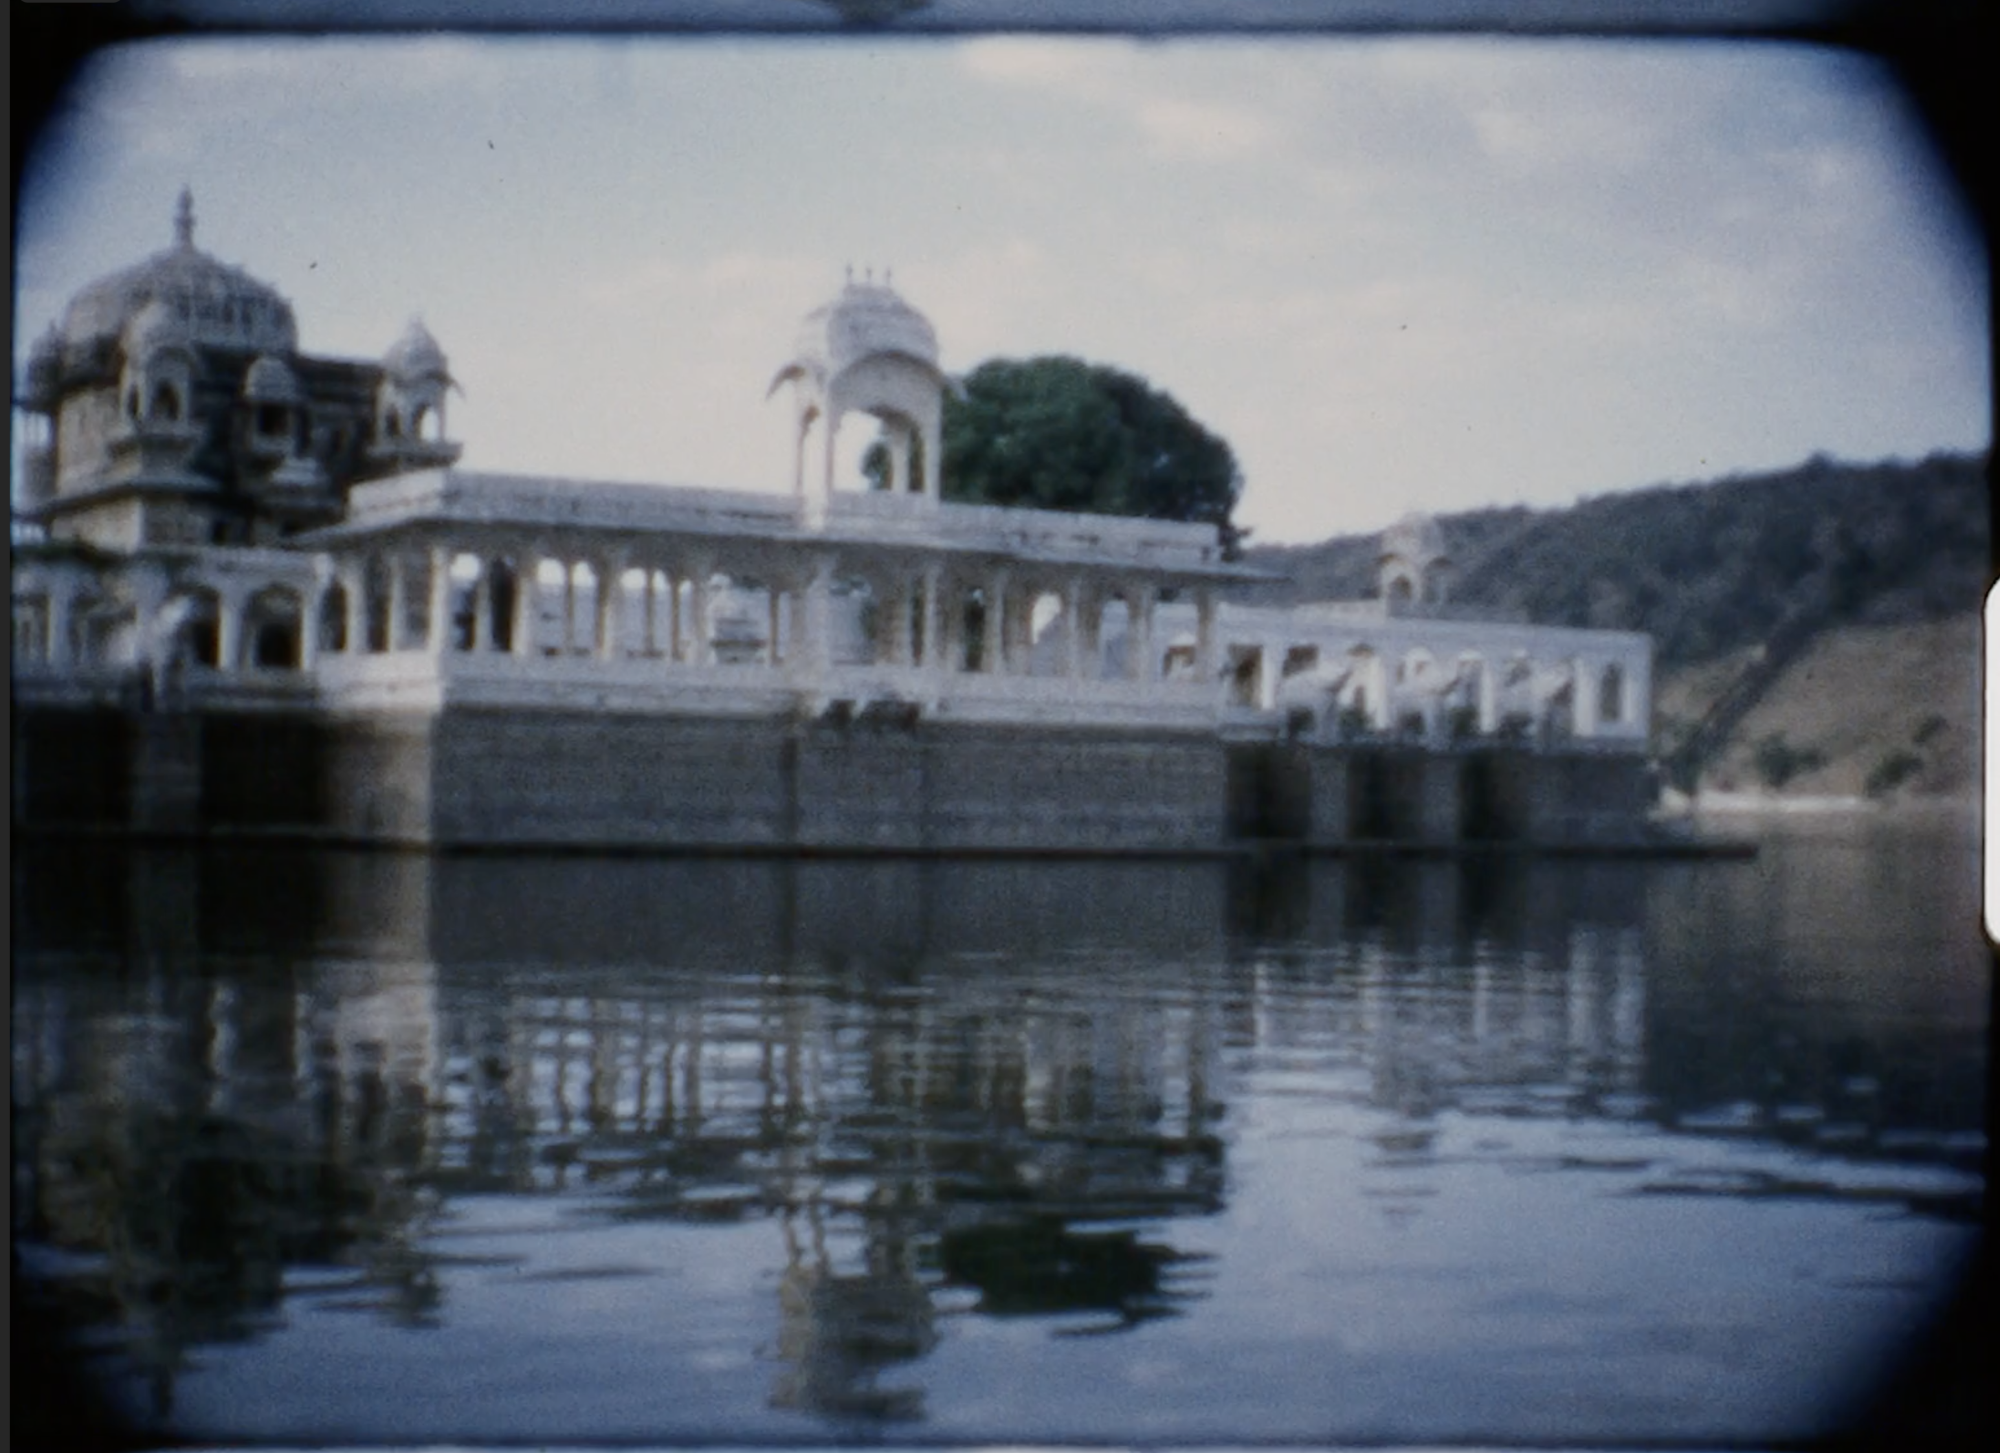 View of buildings from a boat in the Jaipur (F-299-1-0-0-0-8)